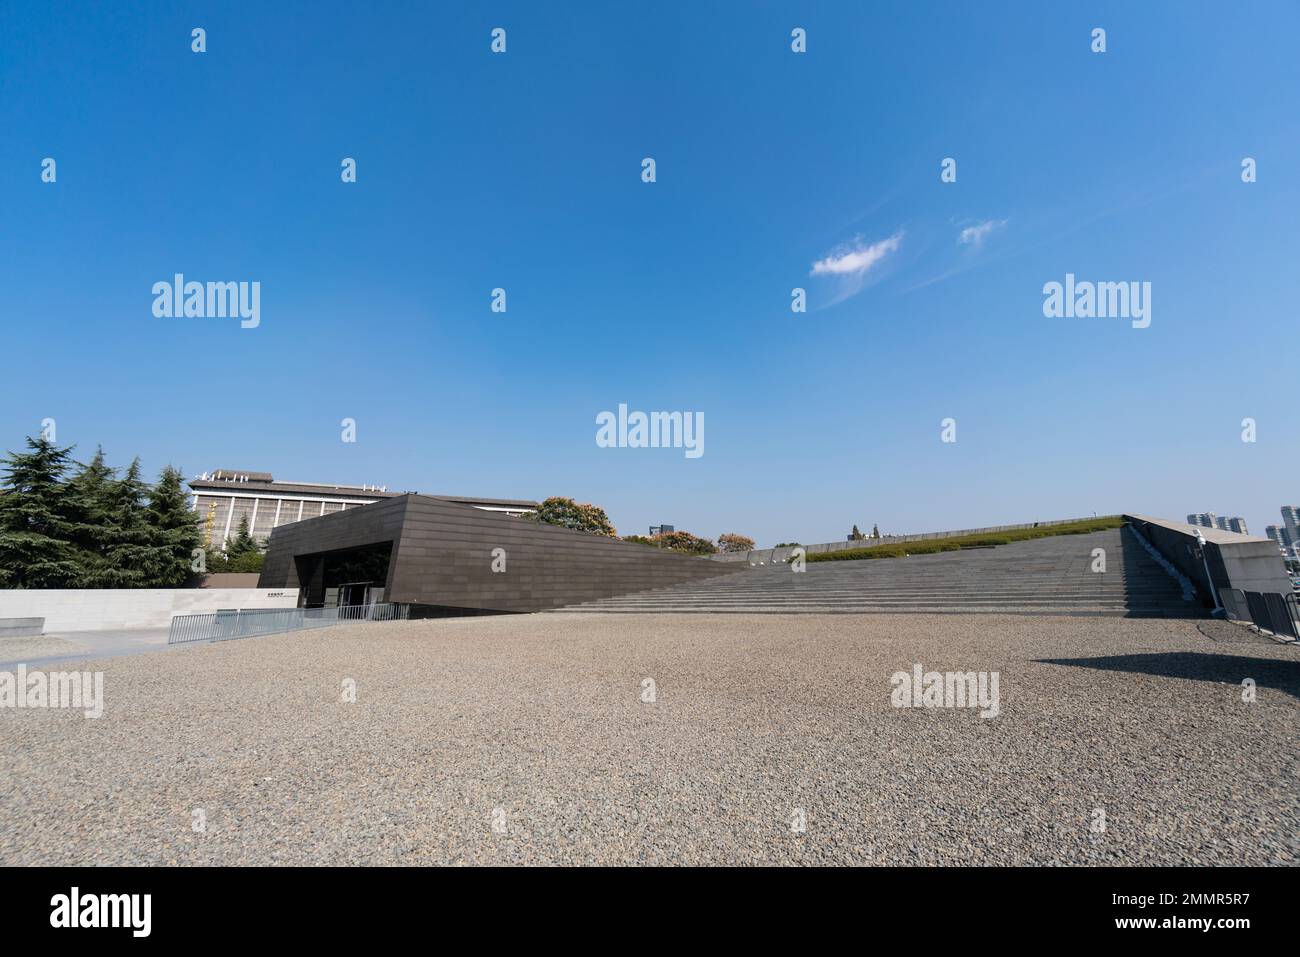 The Memorial Hall of the Victims in Nanjing Massacre by Japanese Invaders Stock Photo